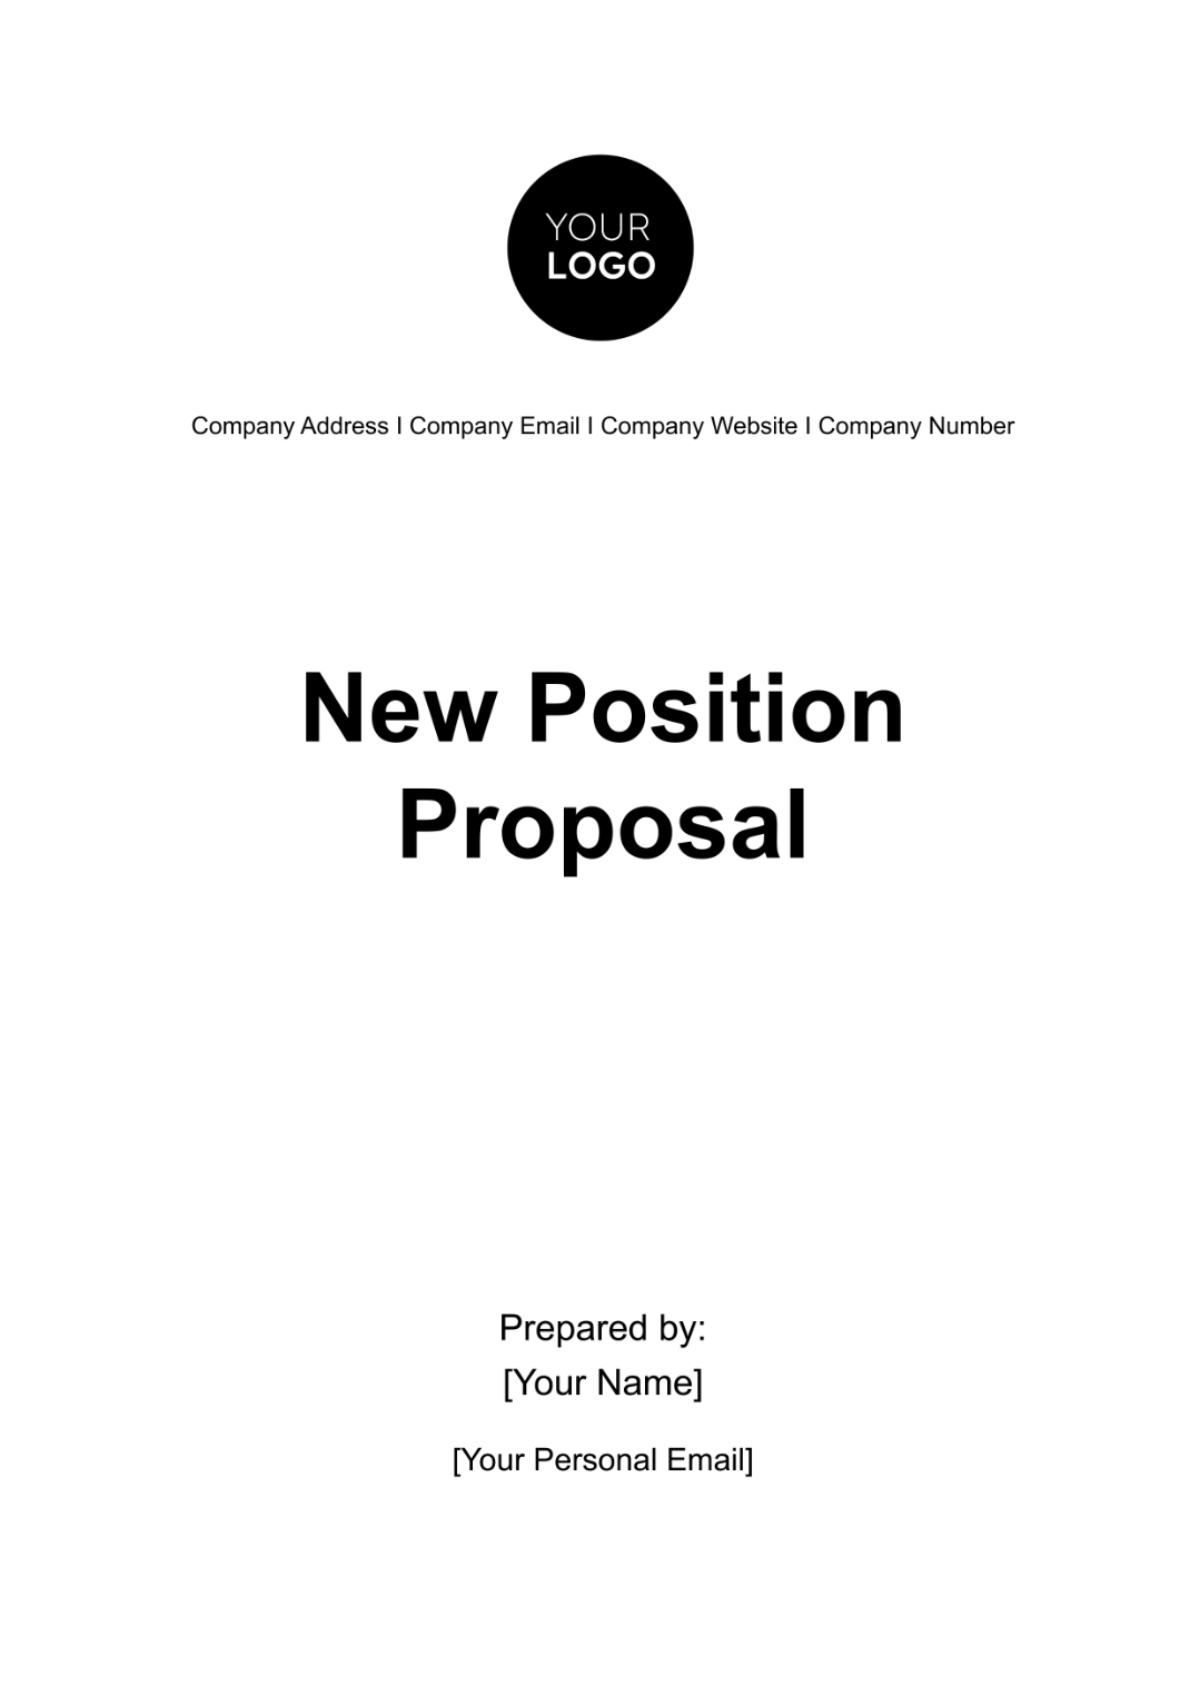 Free New Position Proposal HR Template